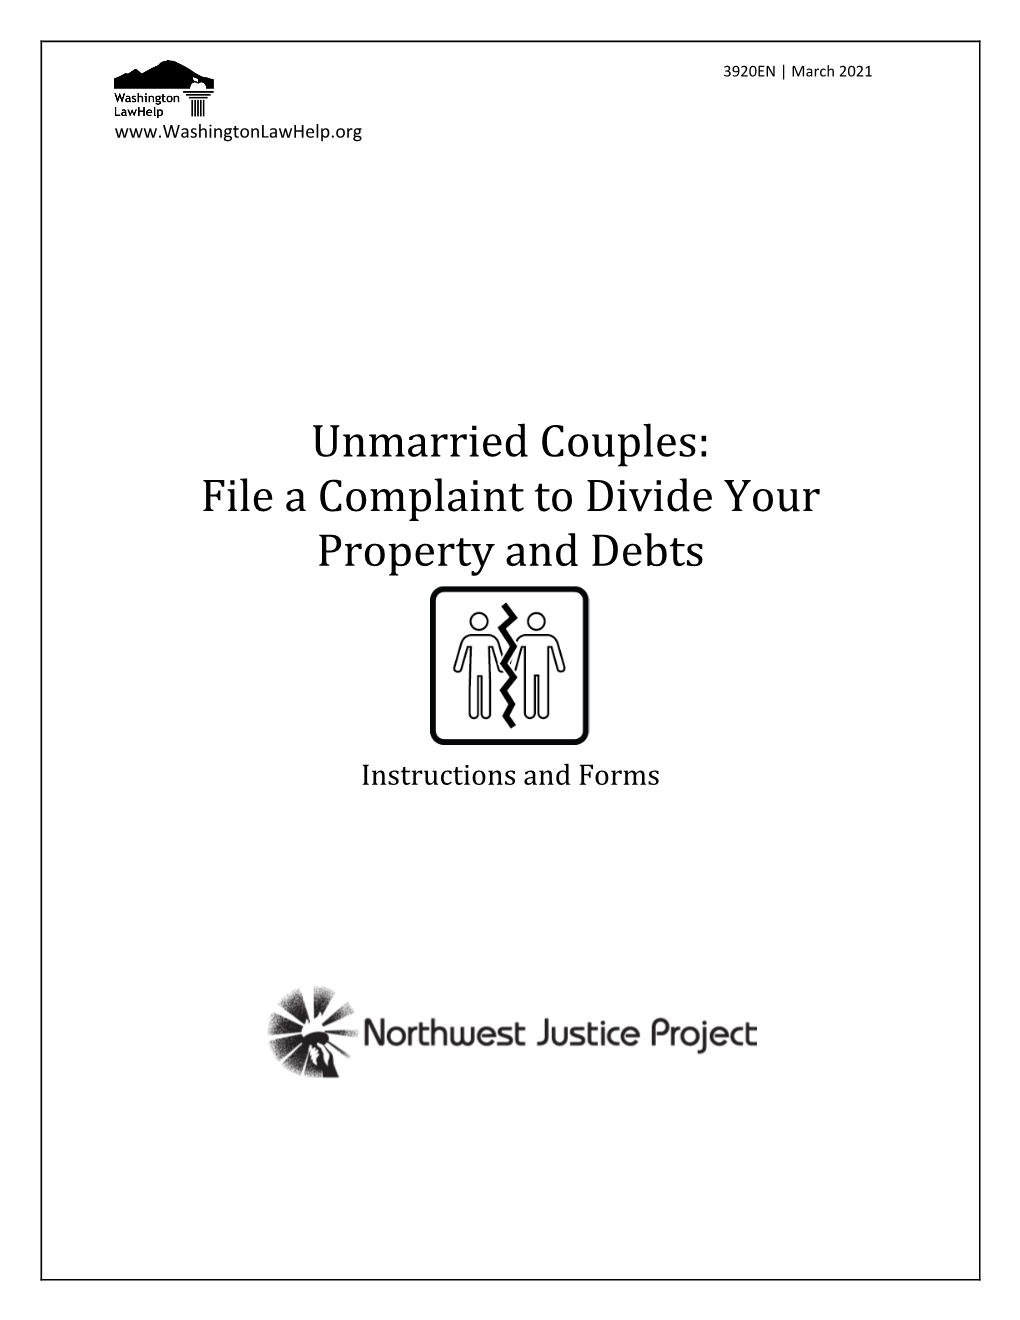 Unmarried Couples: File a Complaint to Divide Your Property and Debts